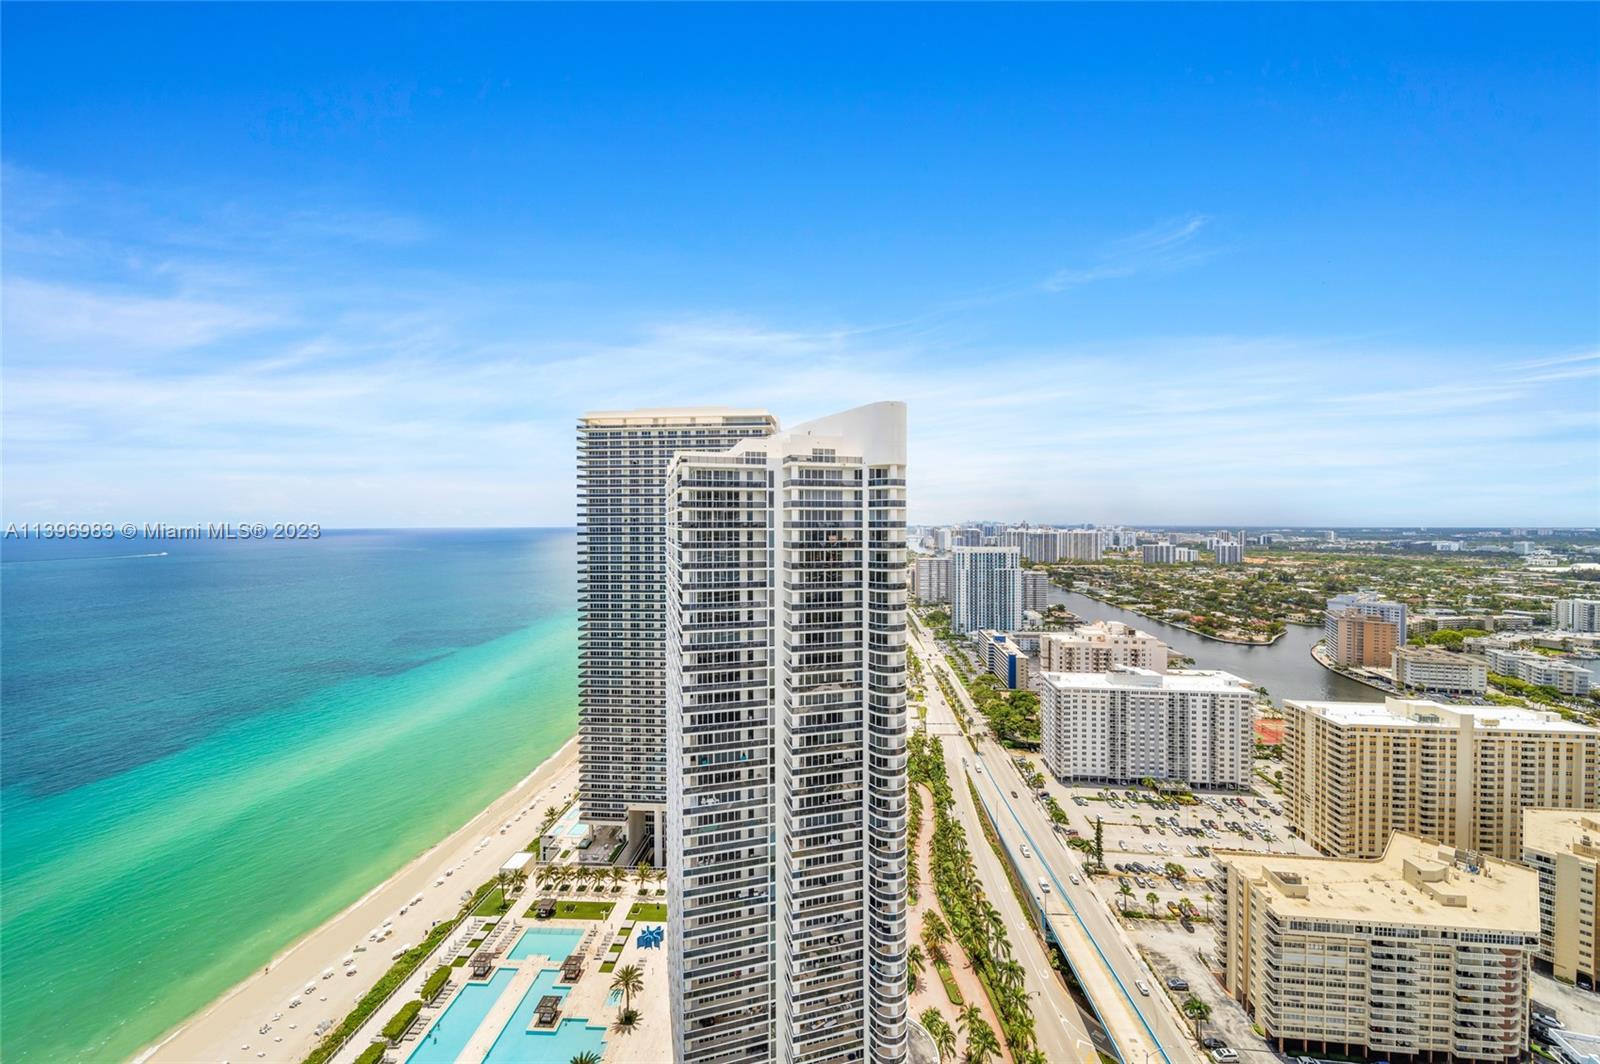 Photo of 4111 S Ocean Dr #3607 in Hollywood, FL